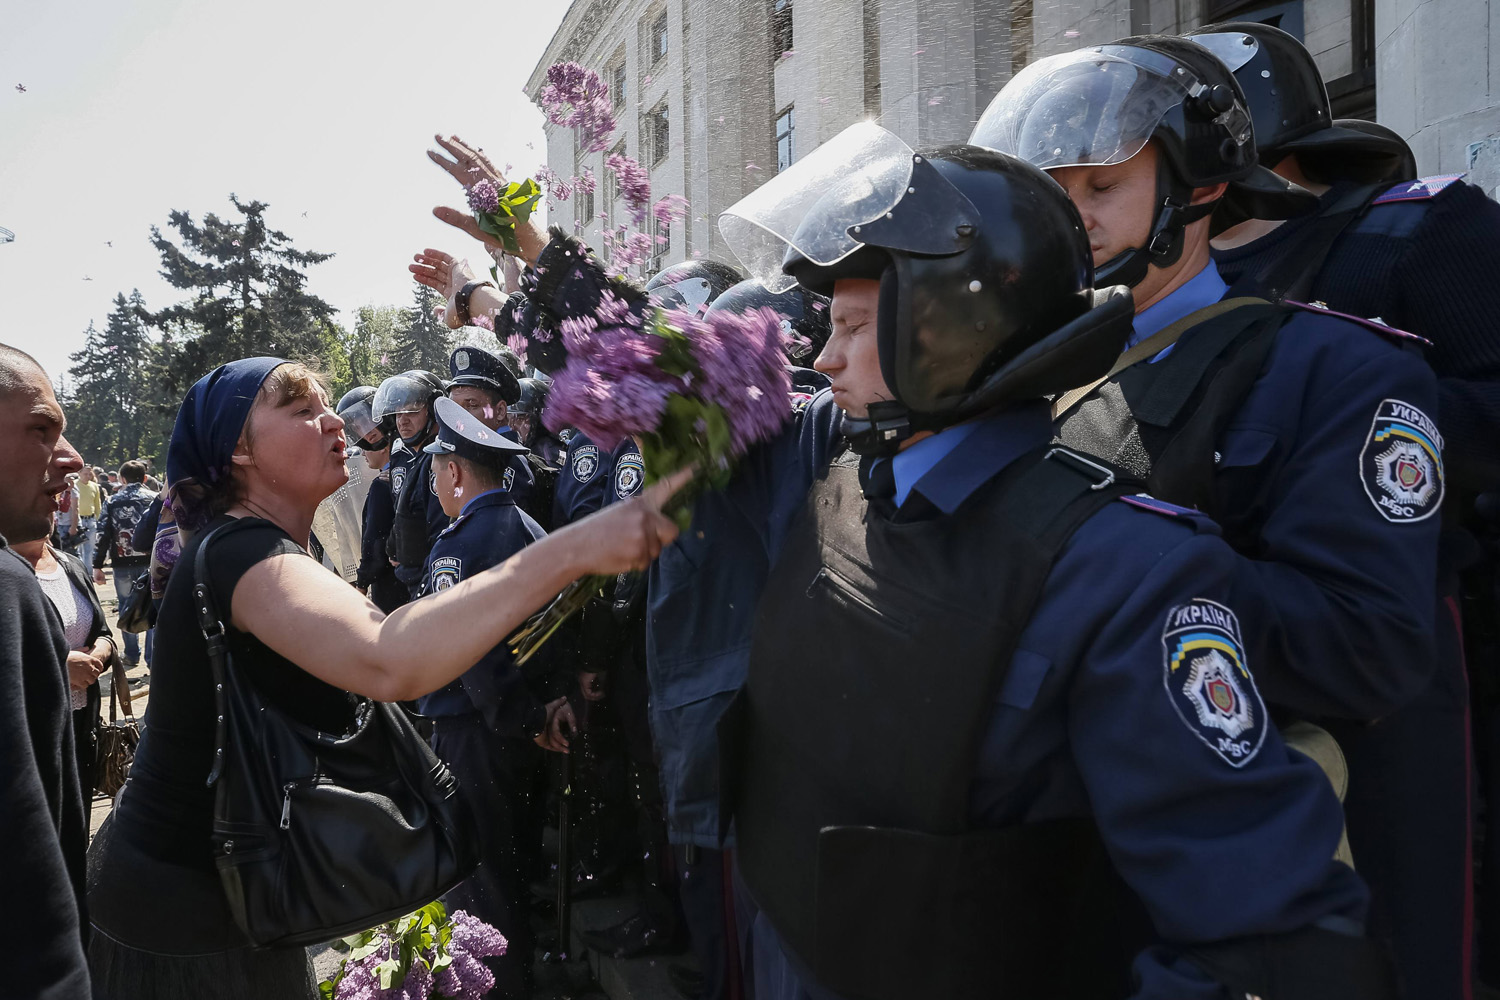 Woman argues with members from the Ukrainian Interior Ministry security forces during a rally outside a trade union building in Odessa